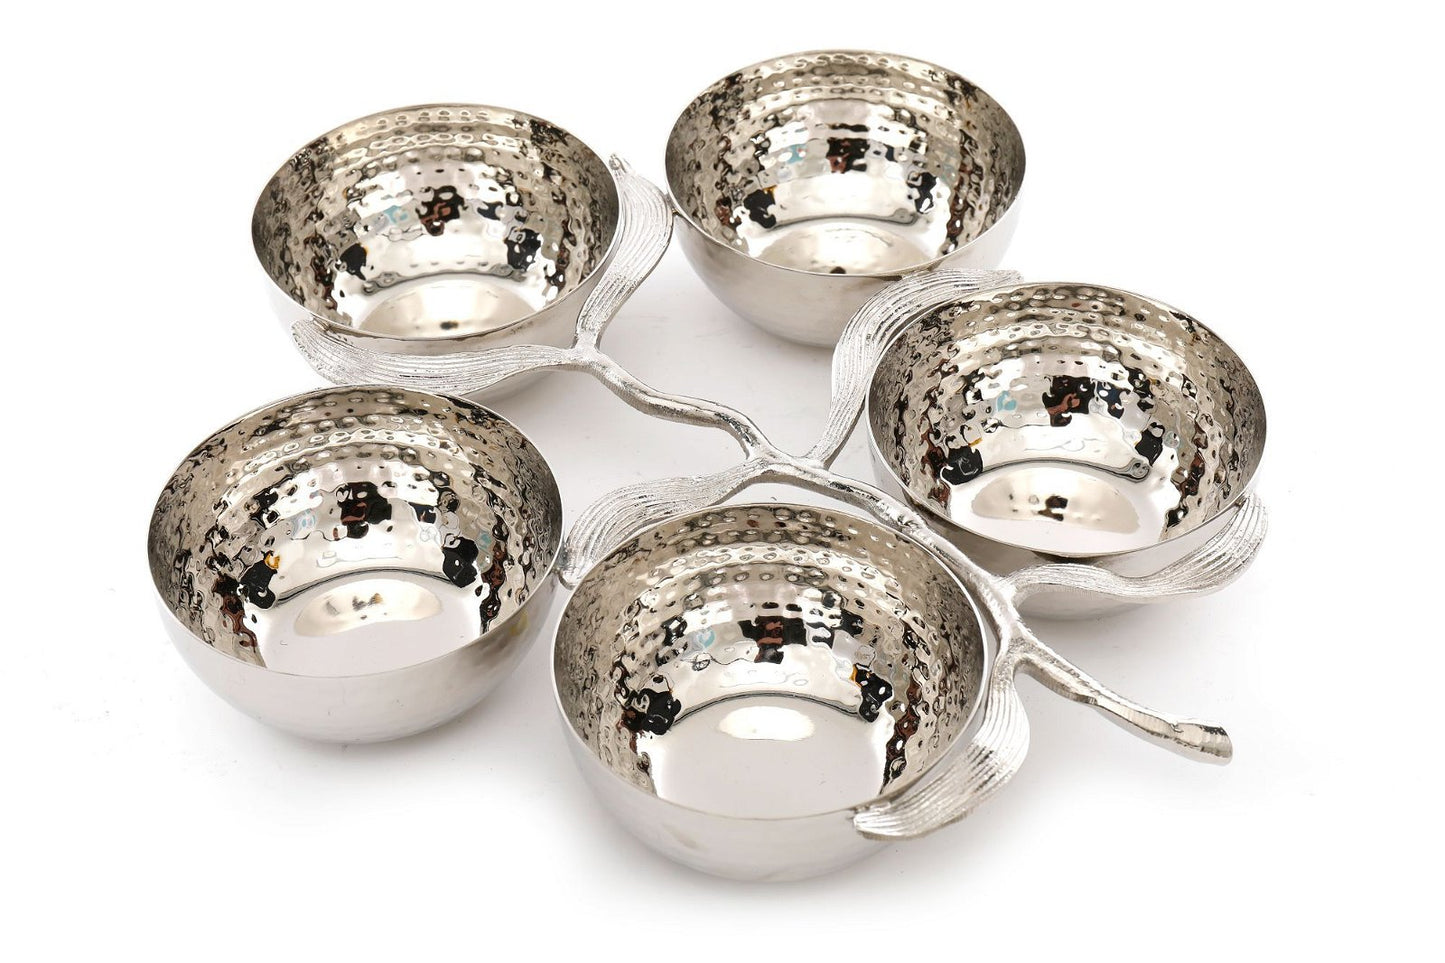 Silver Metal Branch With 5 Snack Bowls 33cm